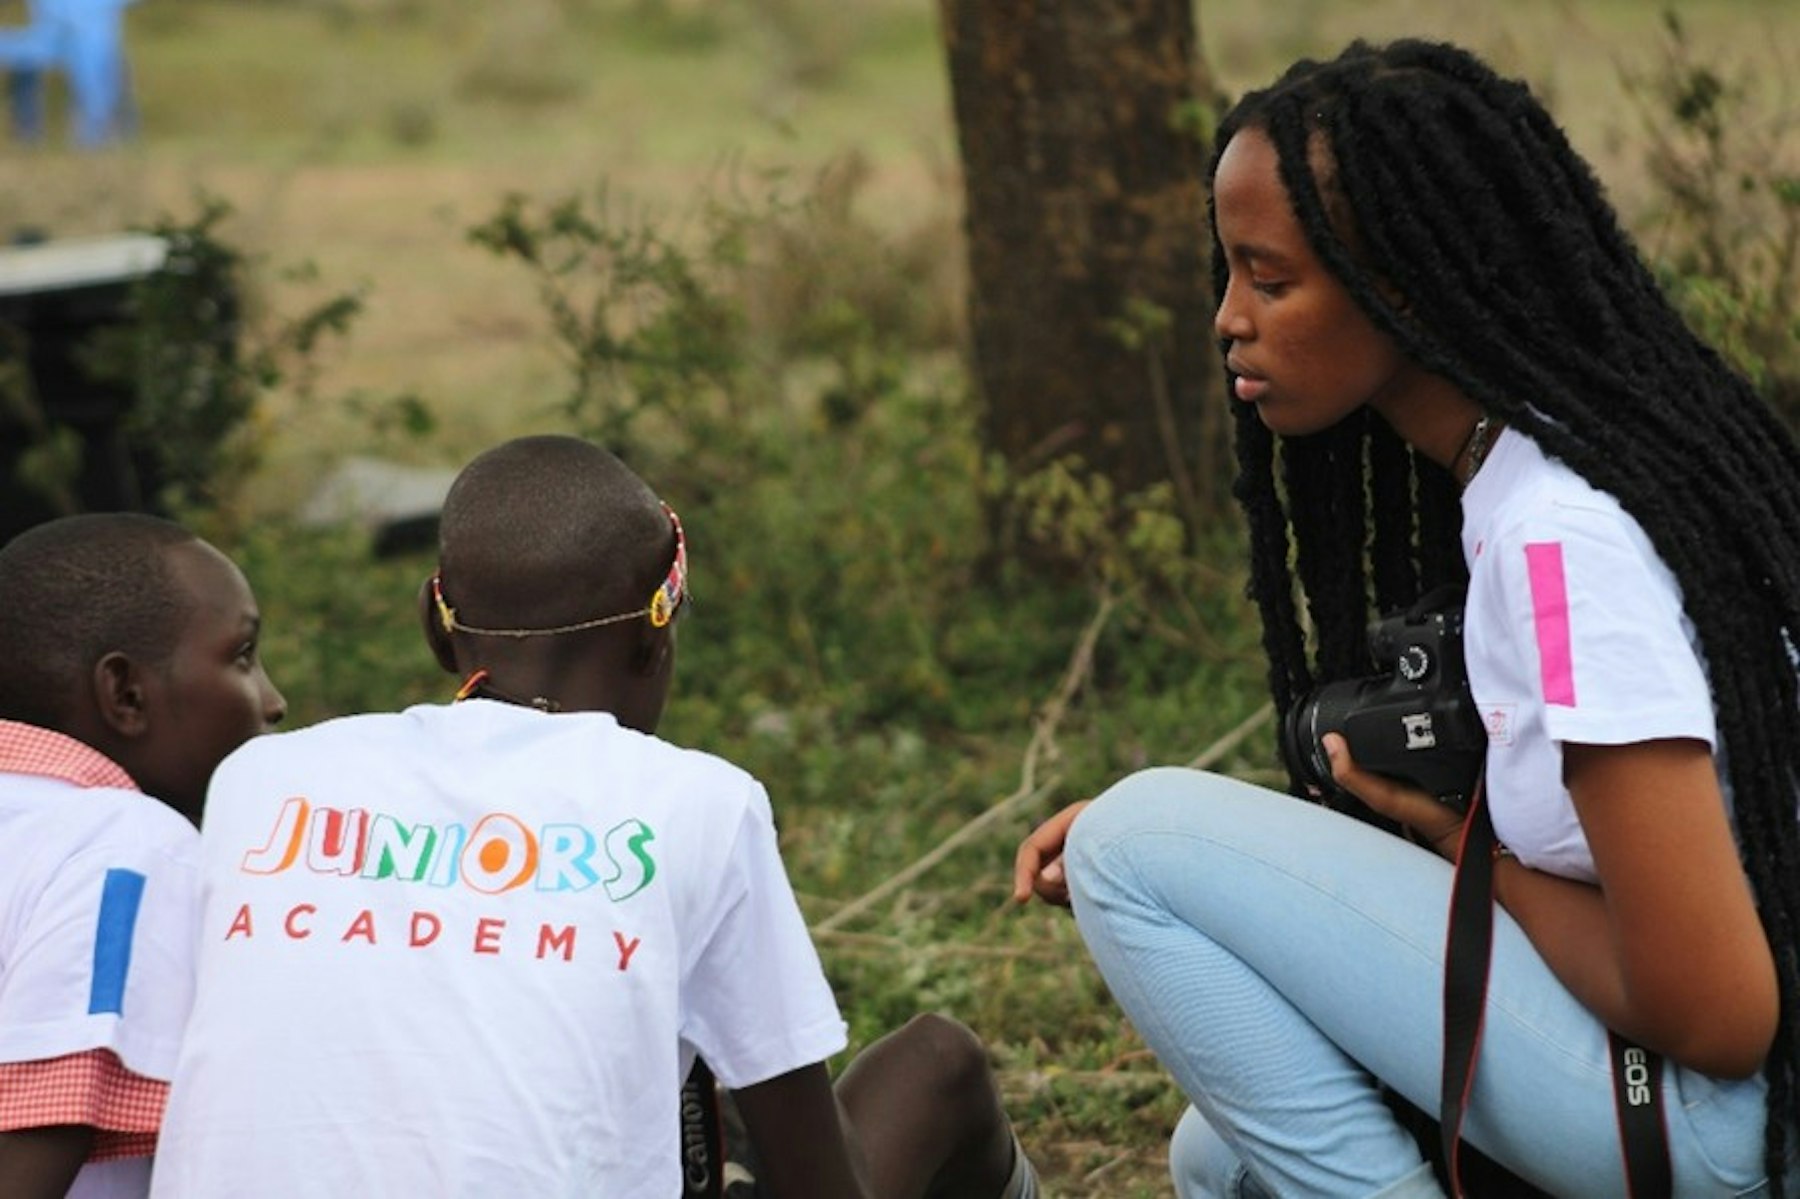 Simaloi Wanjiru Ndegwa worked with Canon to teach local students about photography.